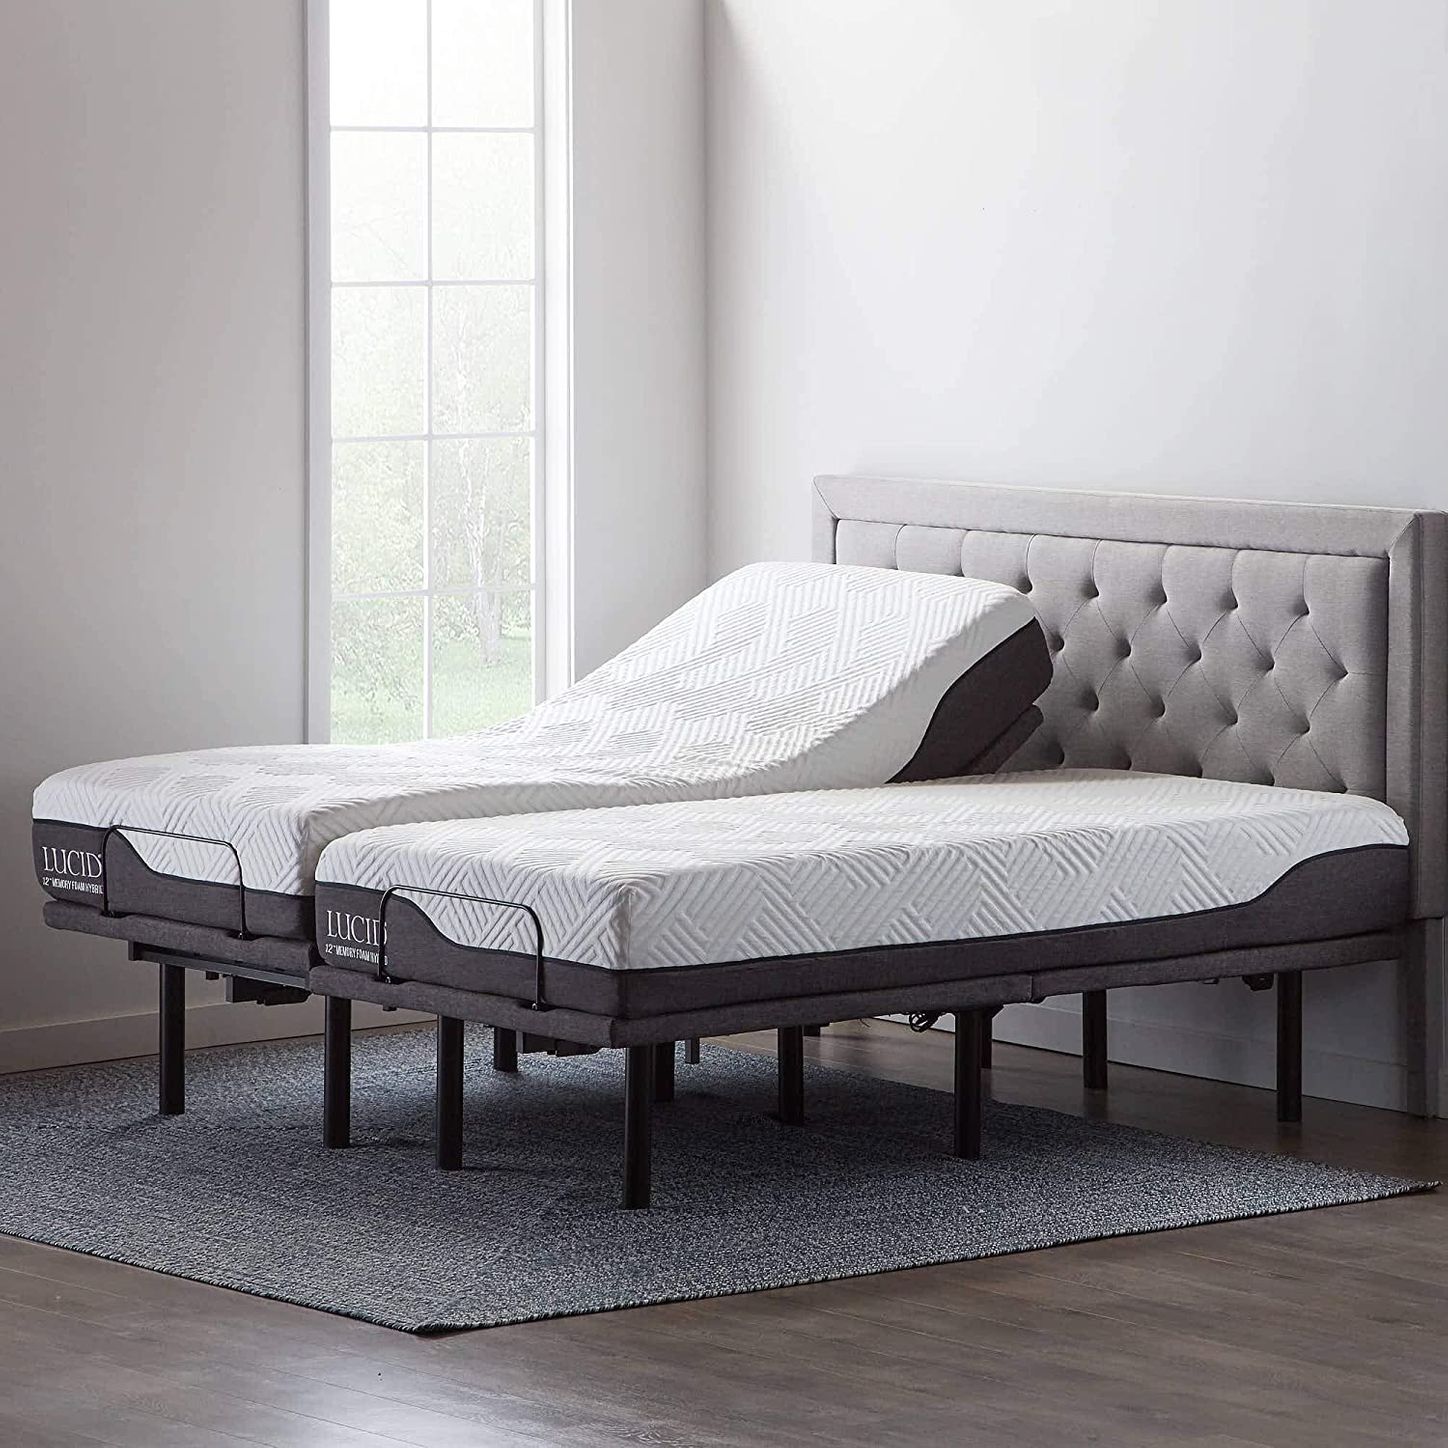 10 Best Adjustable Bed Bases 2021 The, Do Sleep Number Beds Raise Up